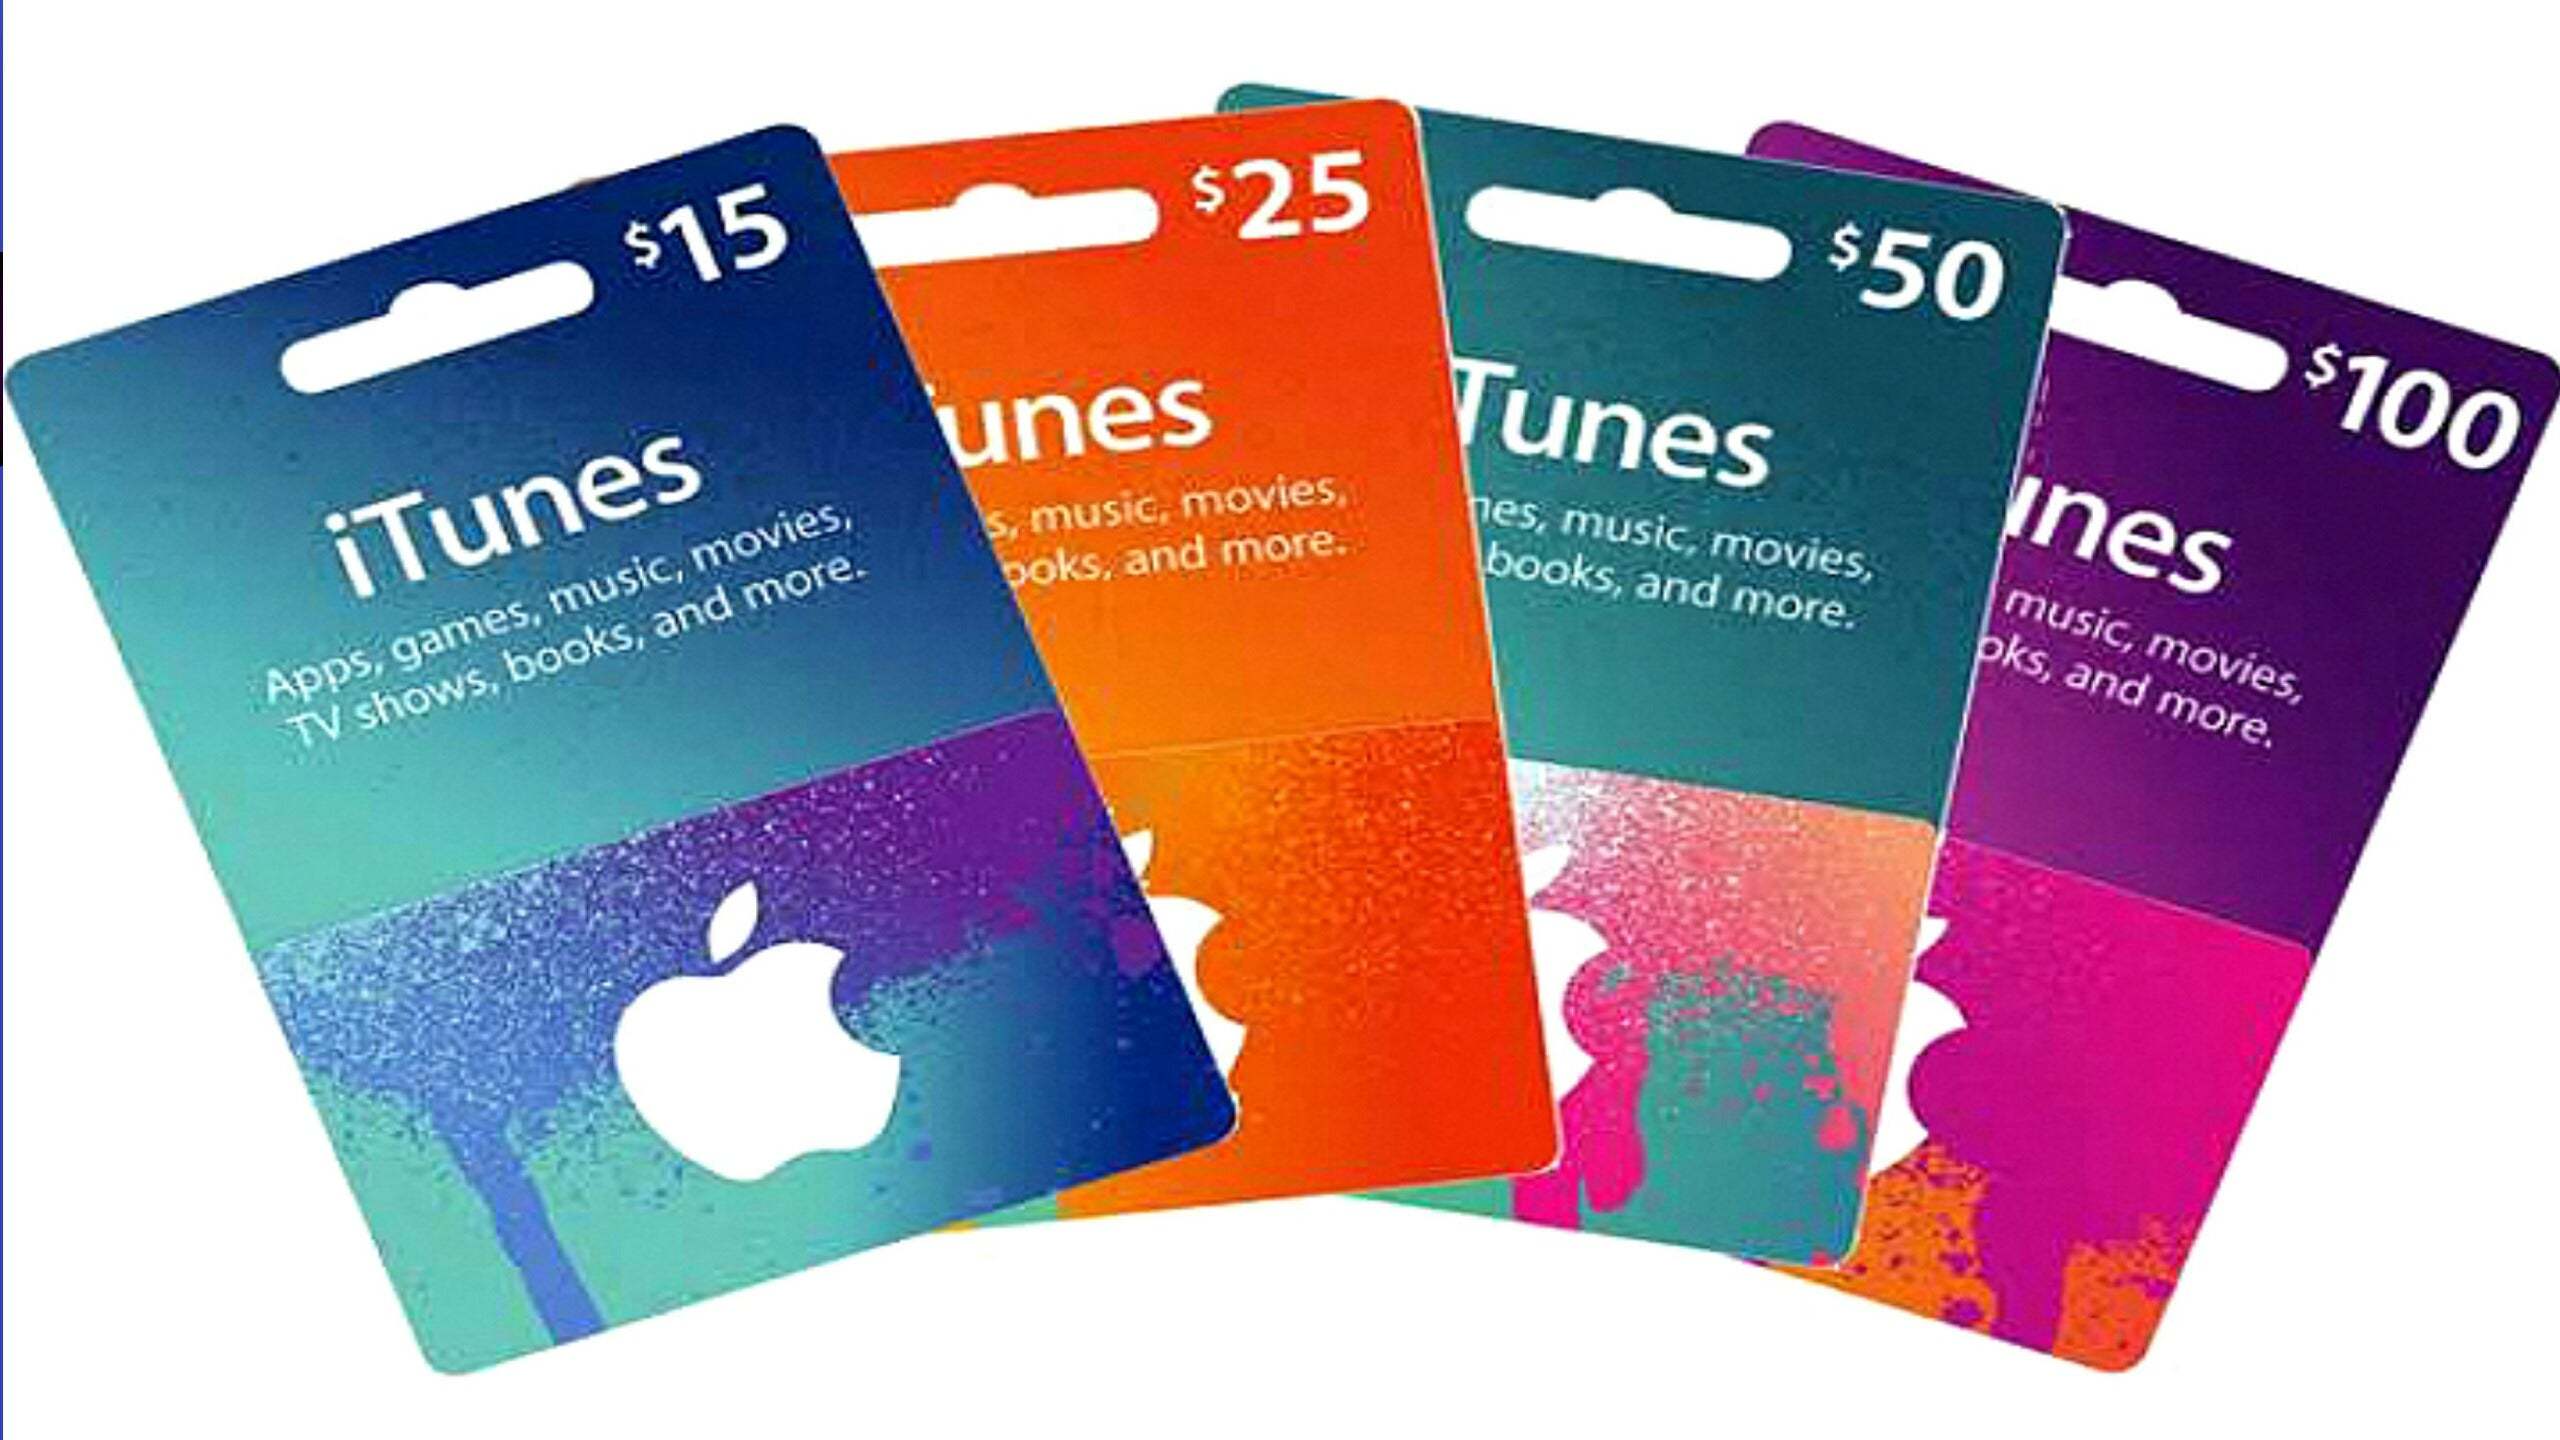 iTunes Card Instant Delivery, how to get Gift Cards at Cheap Price?